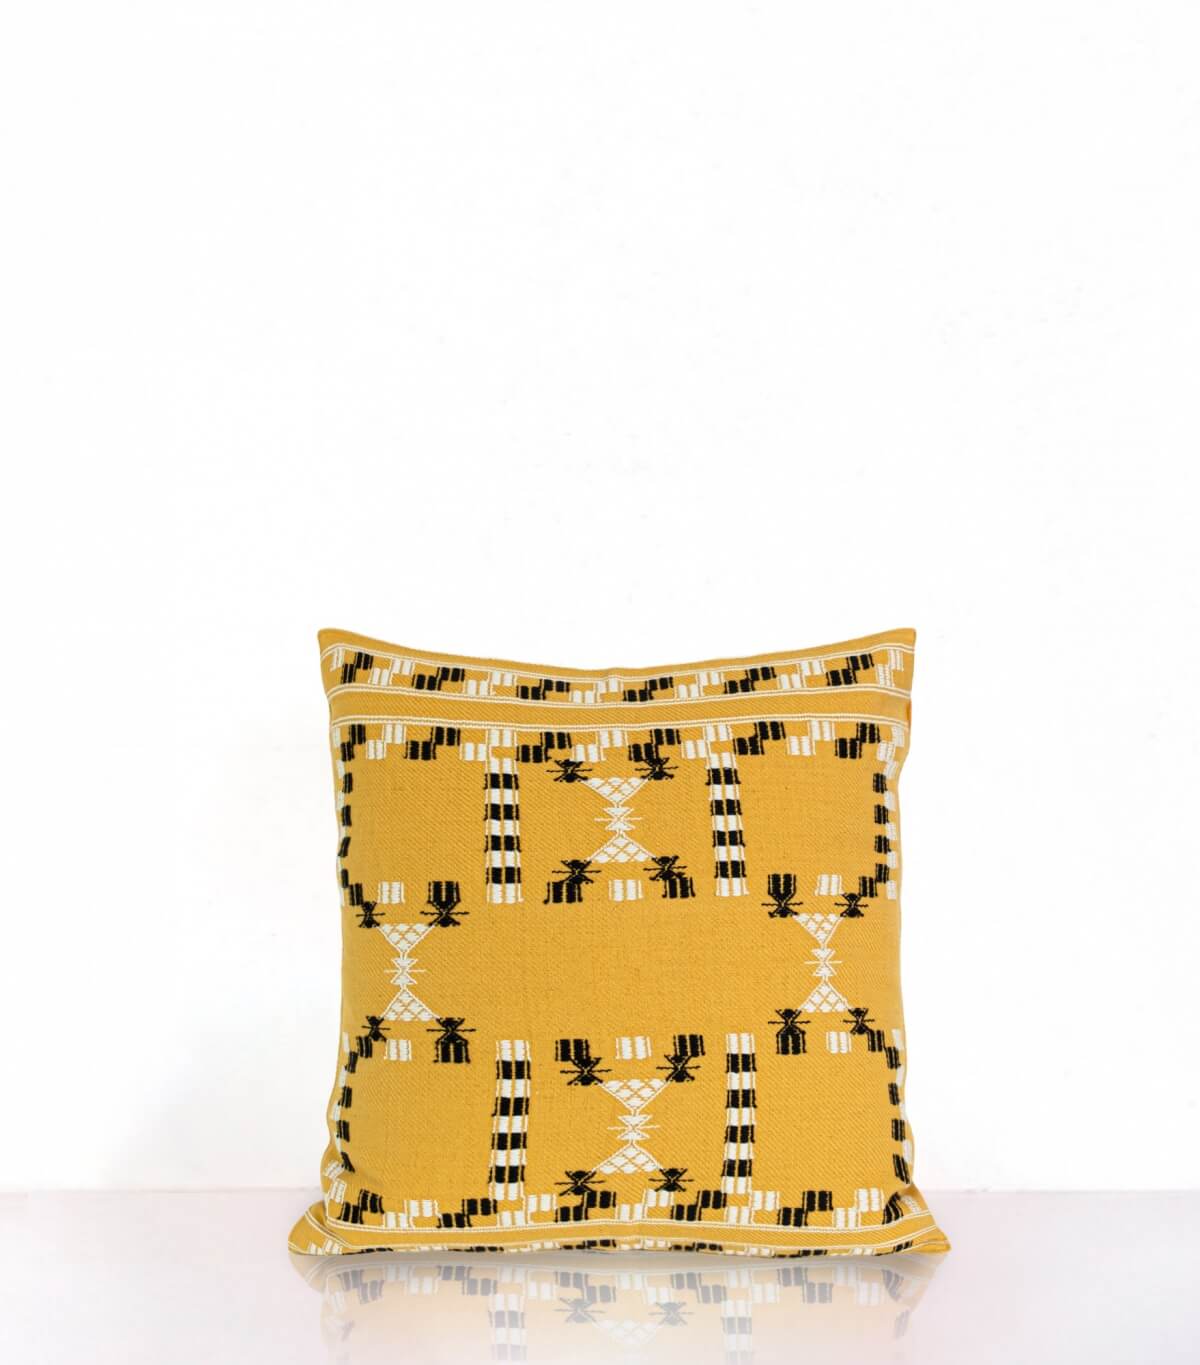 Cushion cover 16x16 inches - mustard yellow